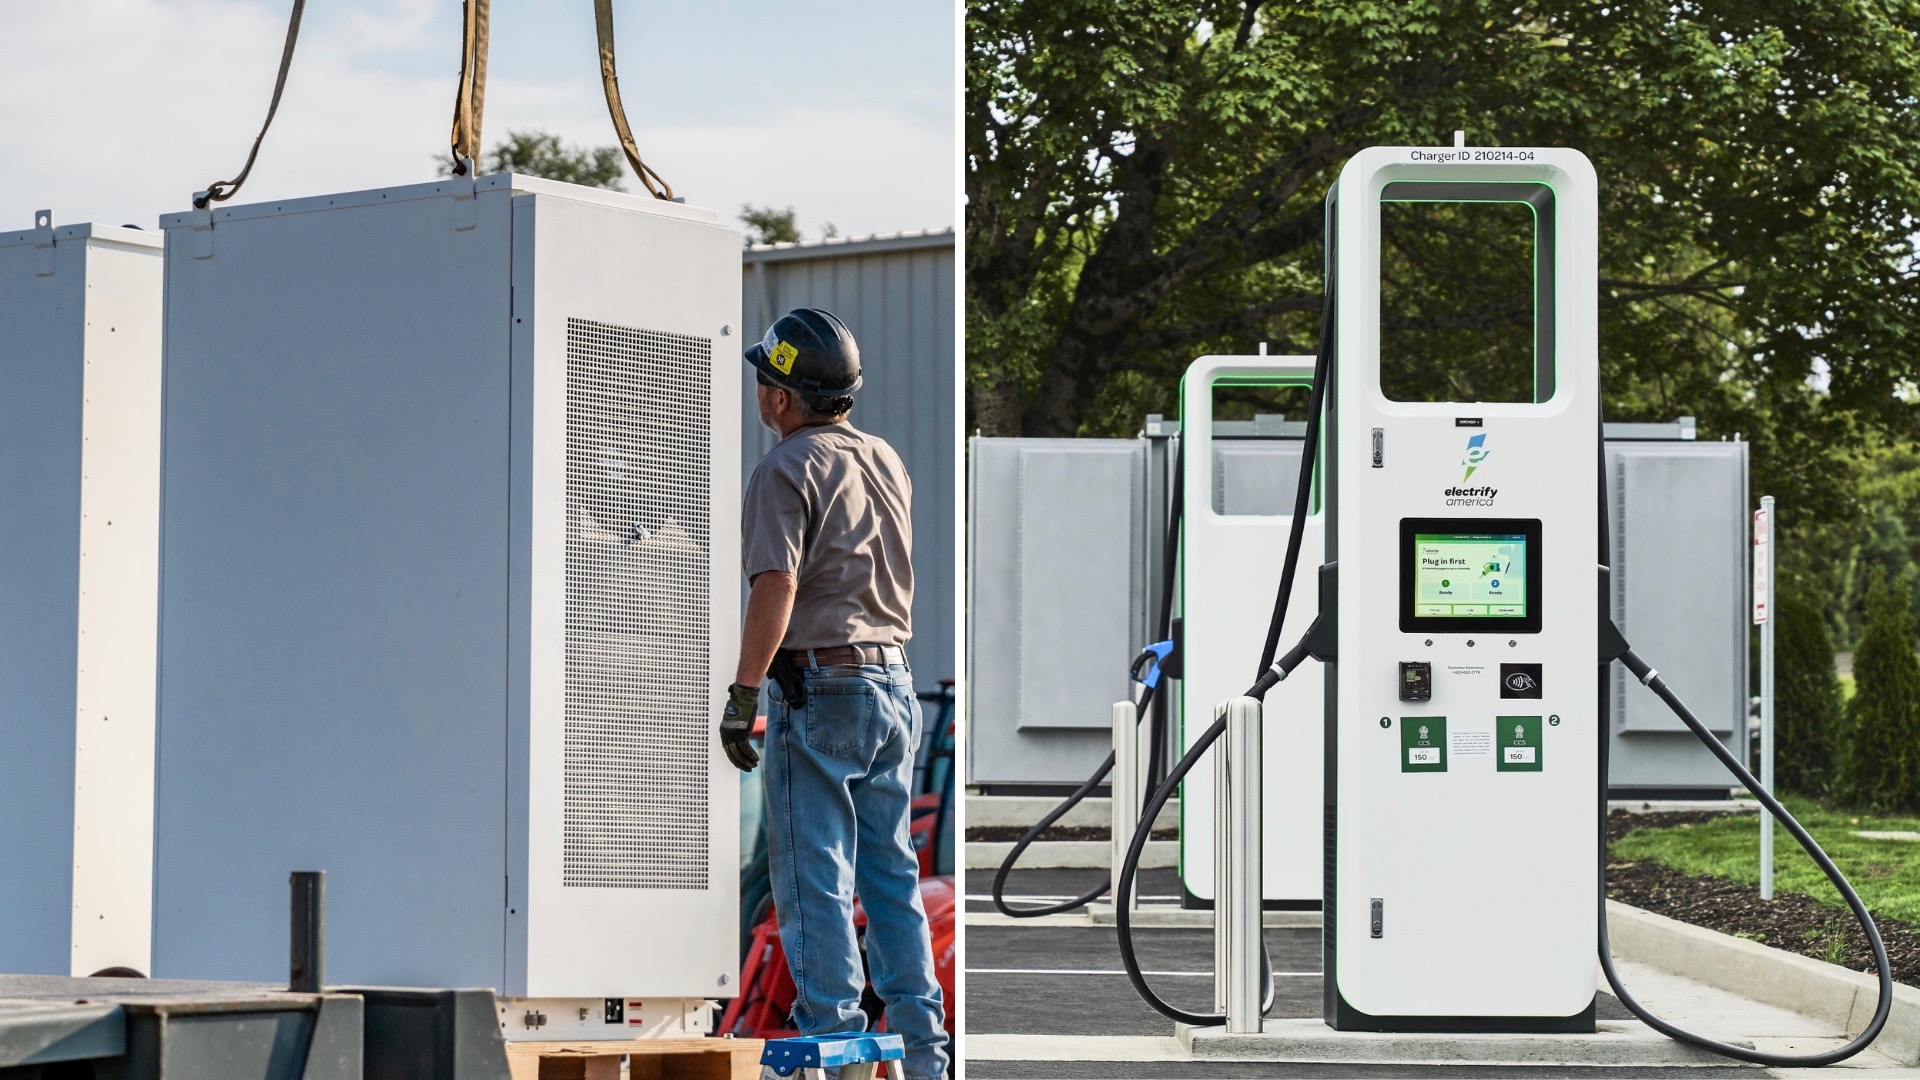 Battery storage allows more flexibility for DC fast-charging station locationsBattery storage allows more flexibility for DC fast-charging station locations